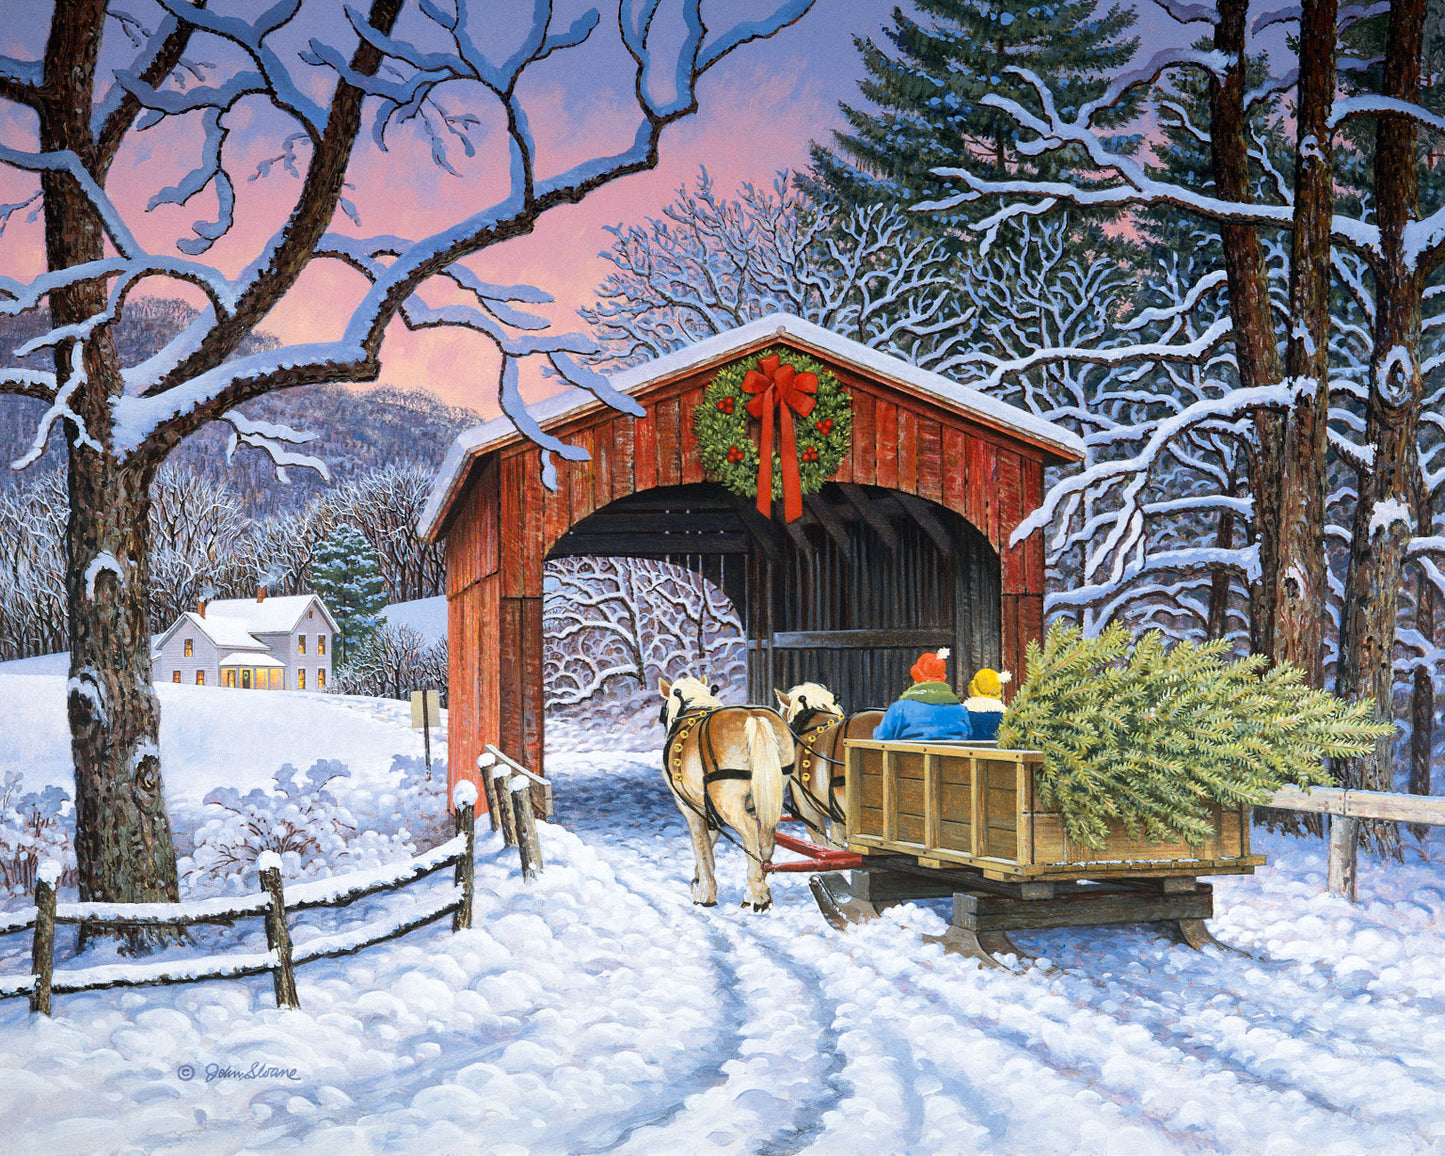 Over the River - Puzzle by John Sloane